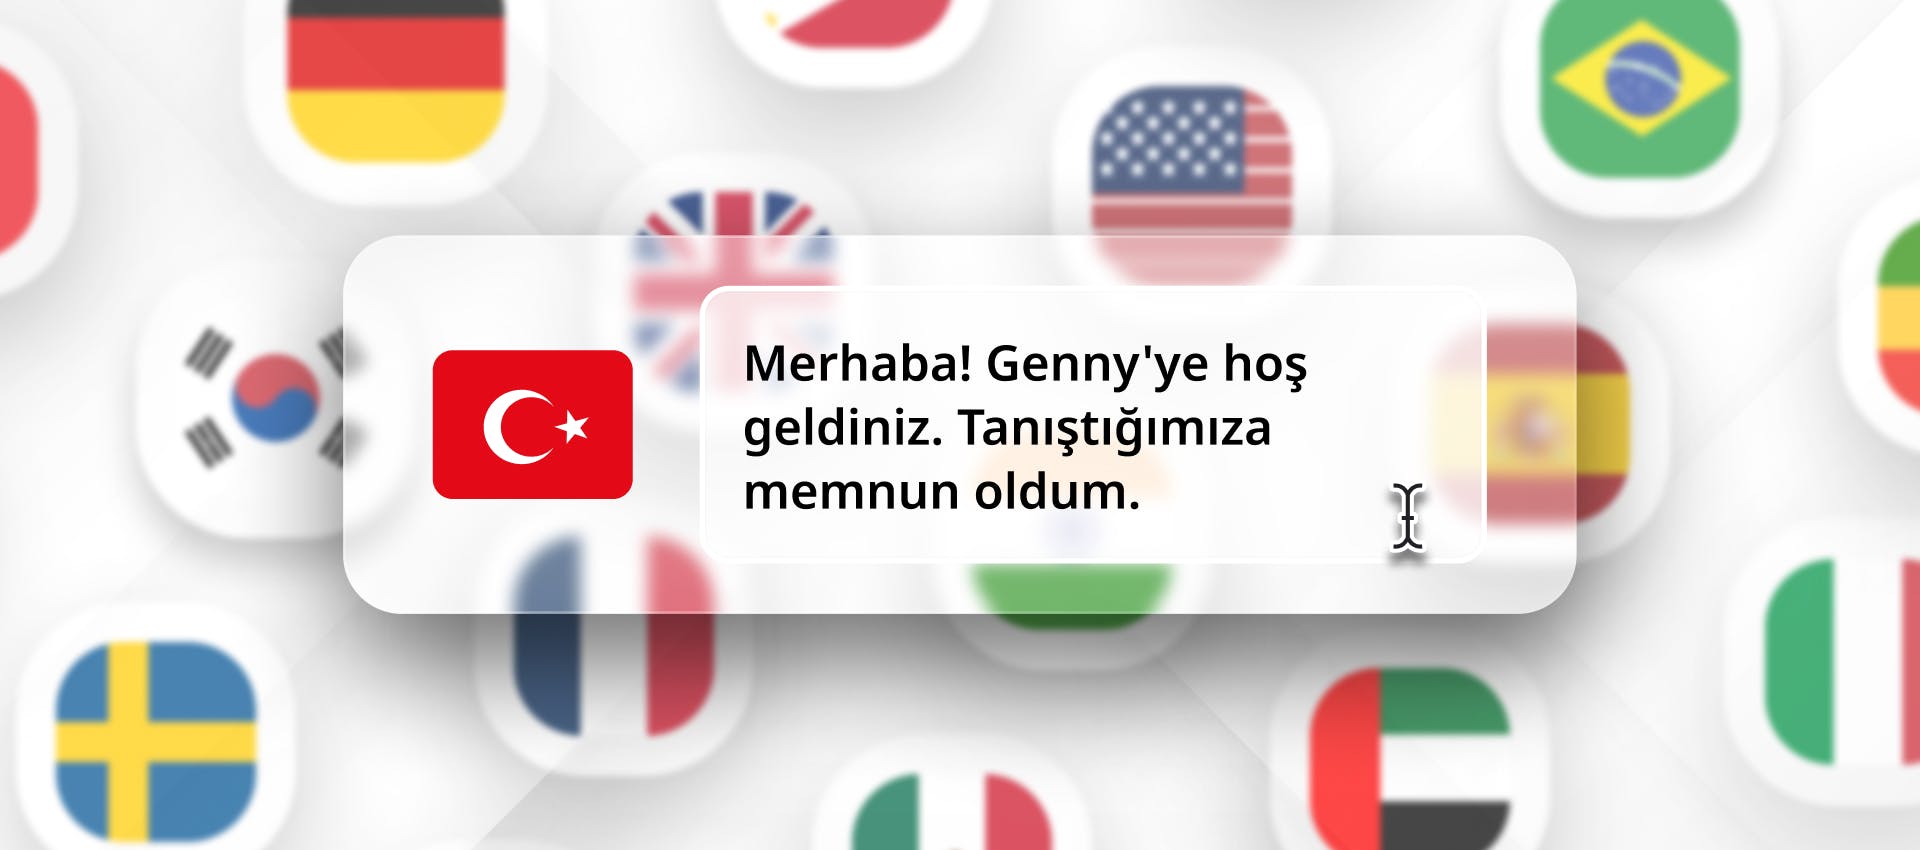 Turkish phrase for Turkish TTS generation with different flags in the background